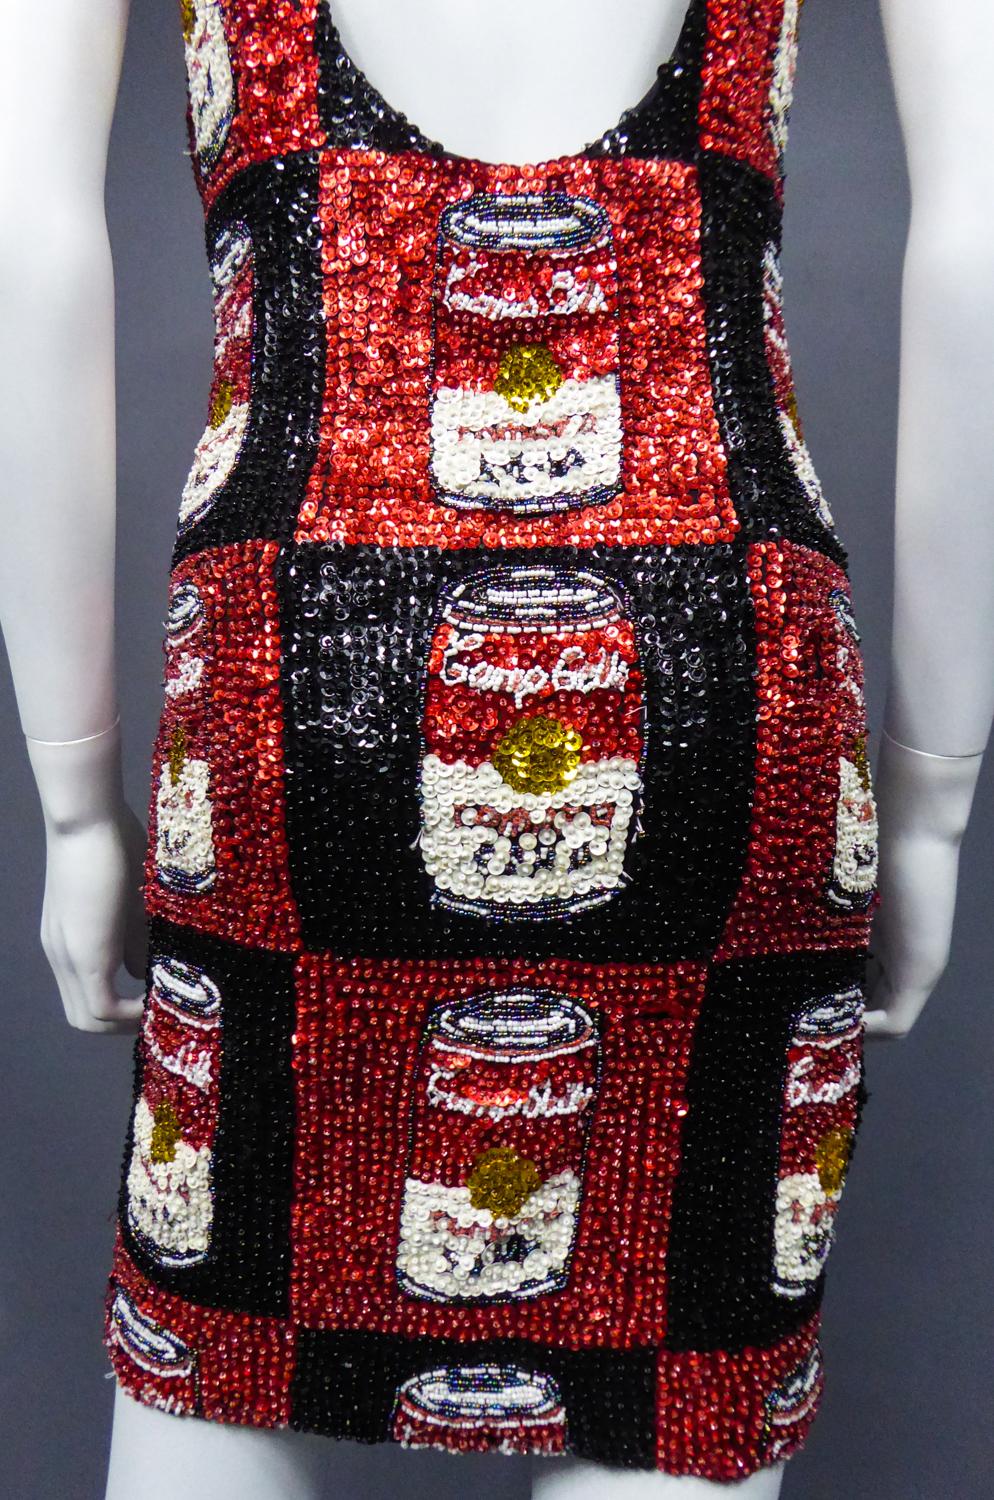 A Campbell's Soup Embroidered Mini Dress Andy Warhol Pink Soda Circa 1990 5